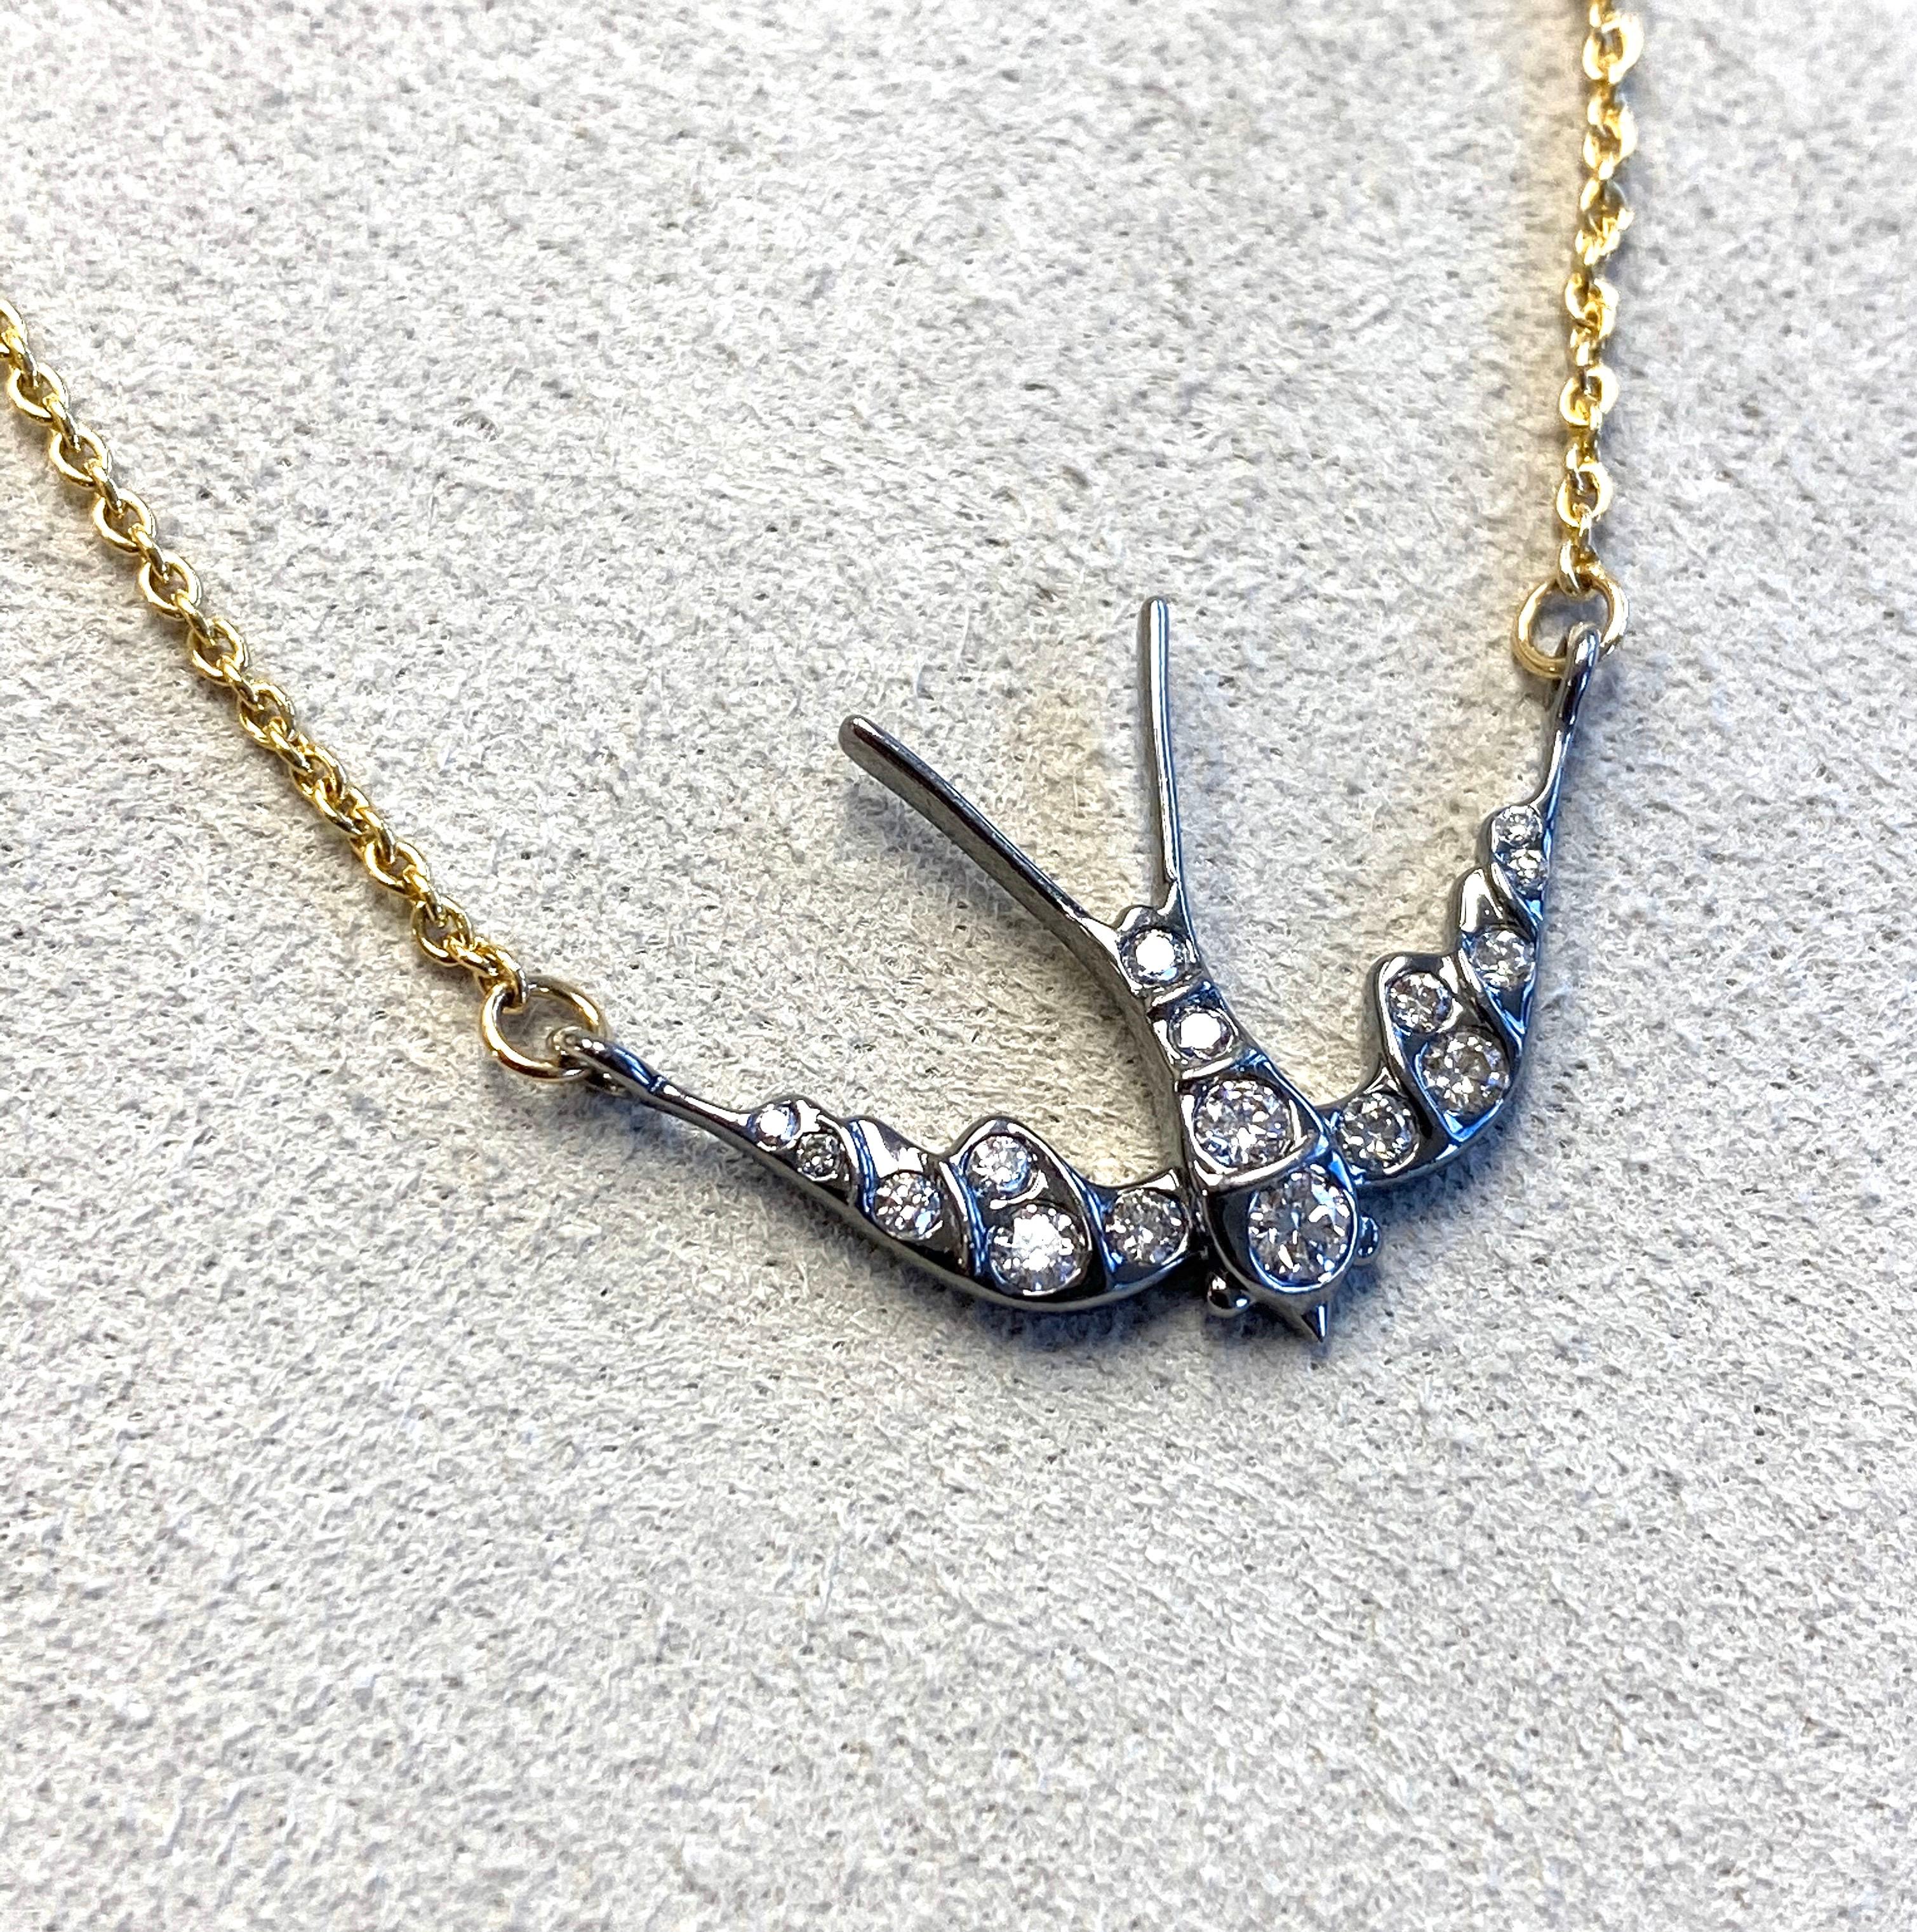 Created in 18 karat yellow gold 
Oxidized silver swallow
Diamonds 0.25 ct approx
18k yellow gold 18 inch cable chain with loops at 17 & 16 inches
Limited edition


About the Designers ~ Dharmesh & Namrata

Drawing inspiration from little things,